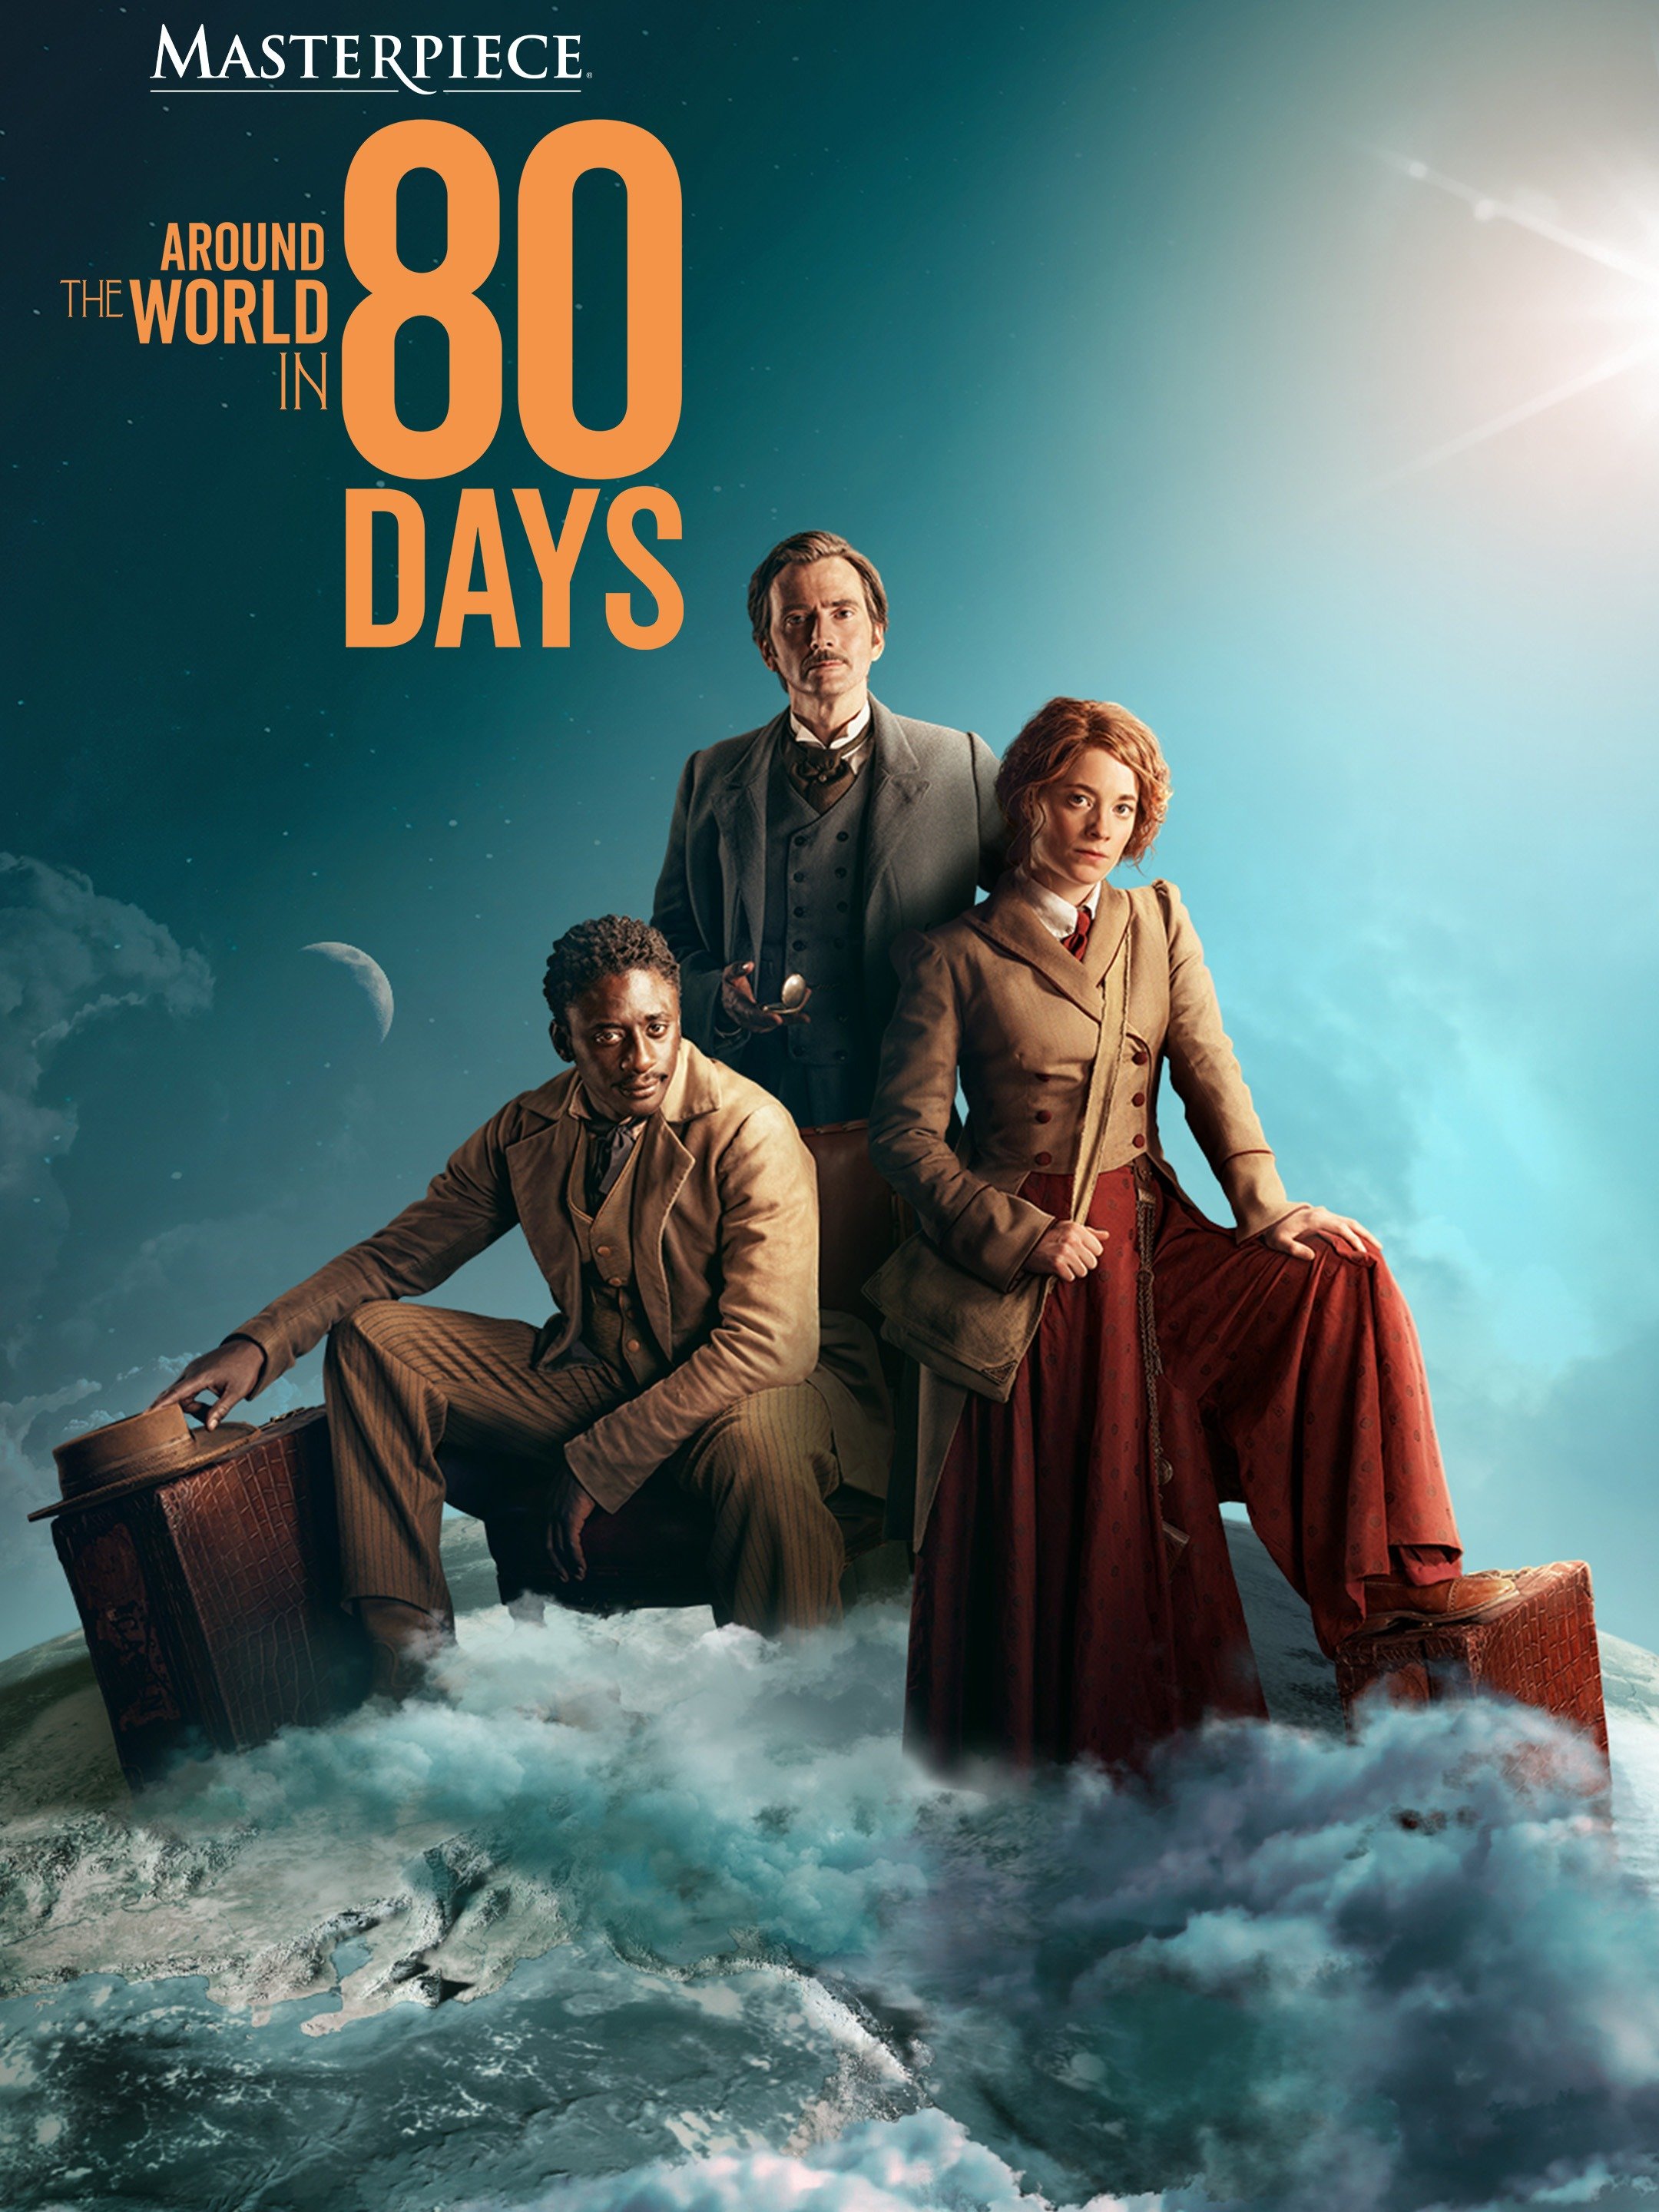 Around the World in 80 Days (2021) Cast and Crew, Trivia, Quotes